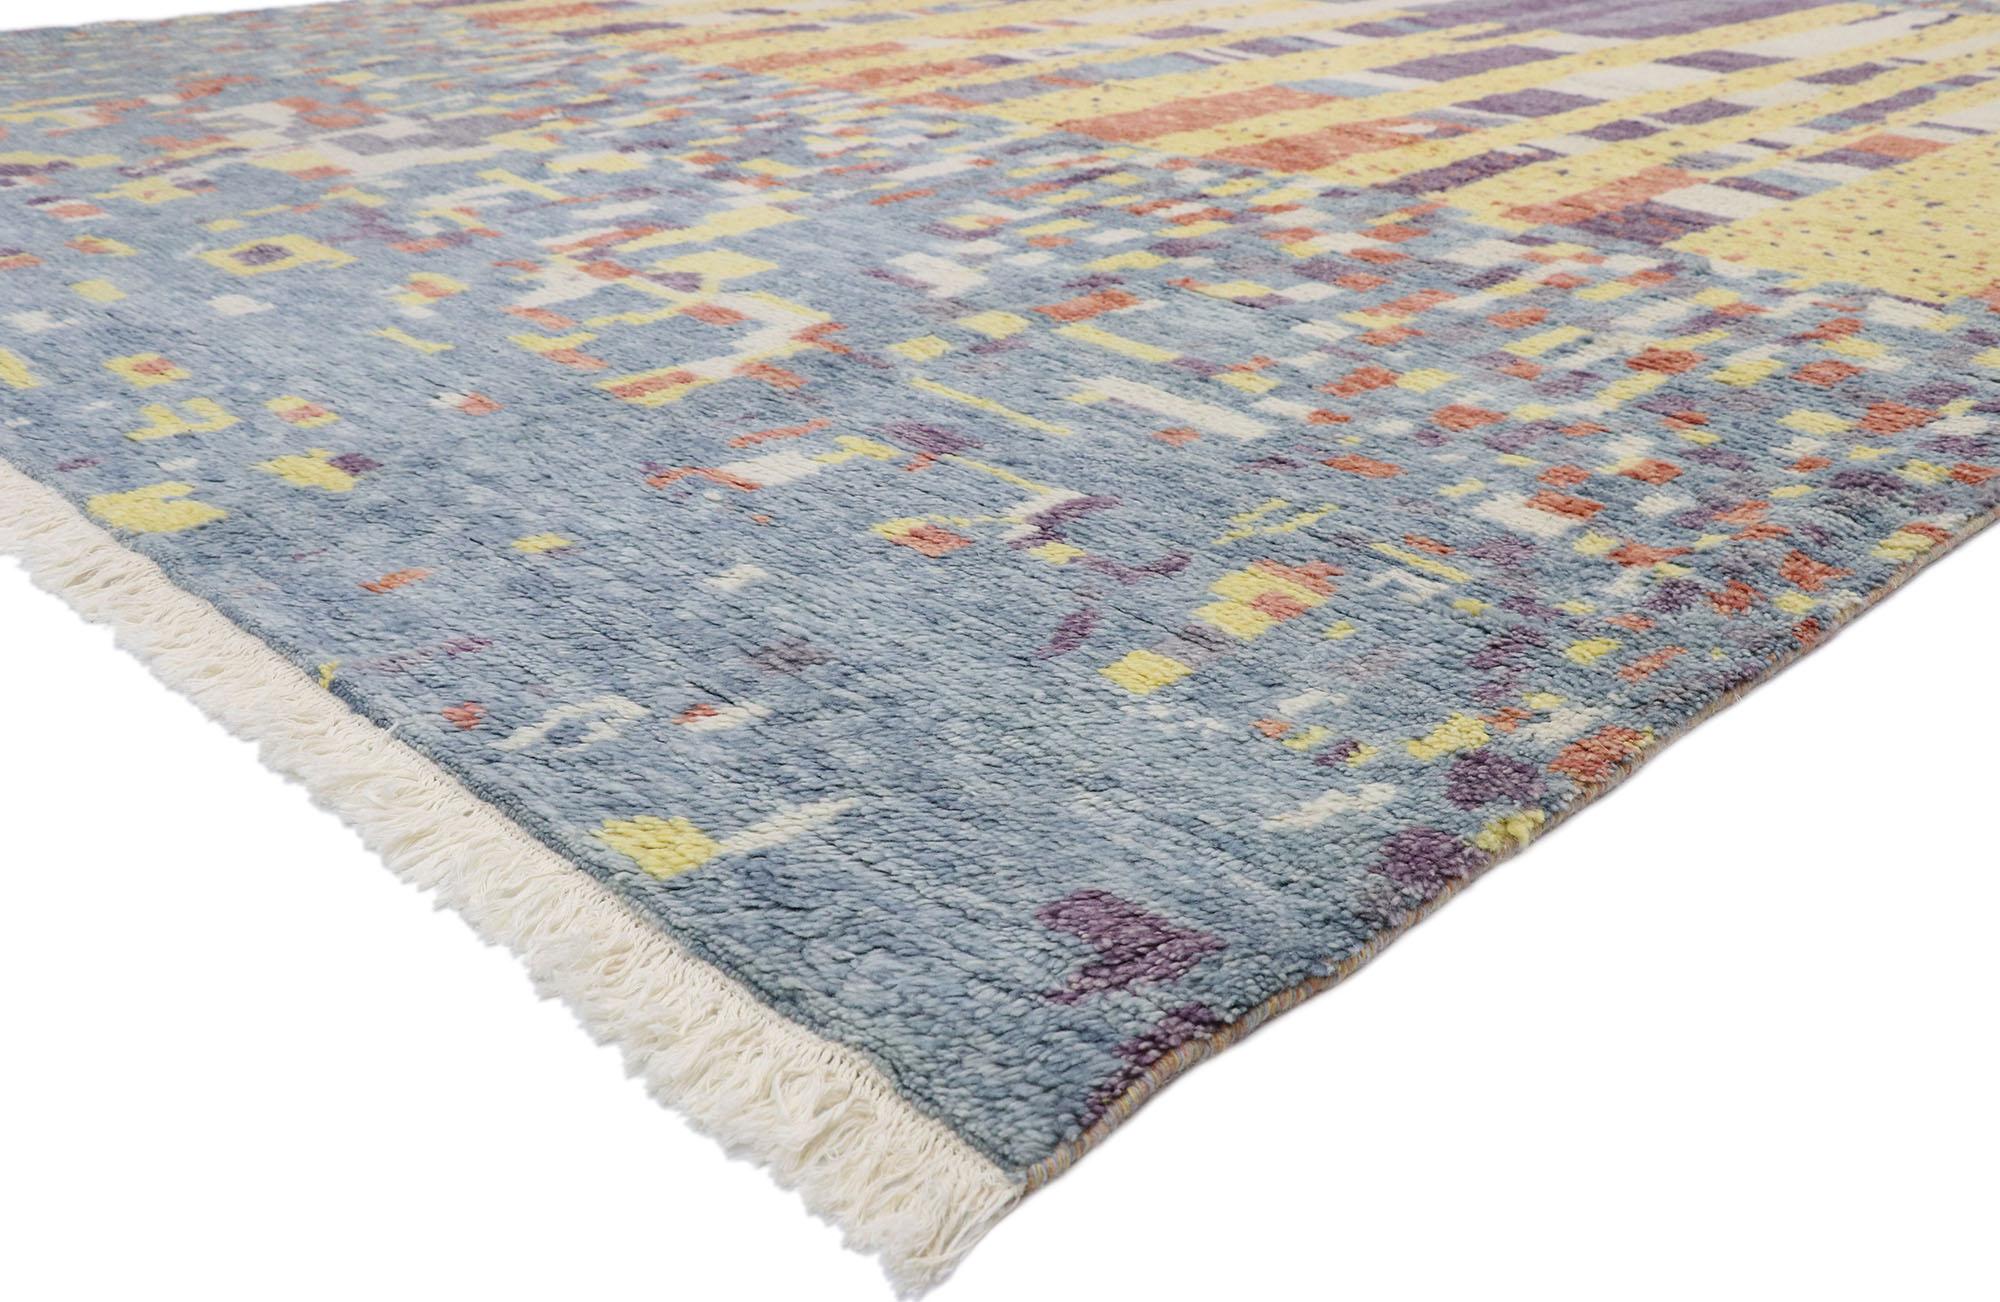 ​30356 New Contemporary Moroccan Style Rug Inspired by Gunta Stölzl 09'10 x 13'09. ​​Showcasing a bold expressive design, incredible detail and texture, this hand knotted wool contemporary Moroccan style area rug is a captivating vision of woven